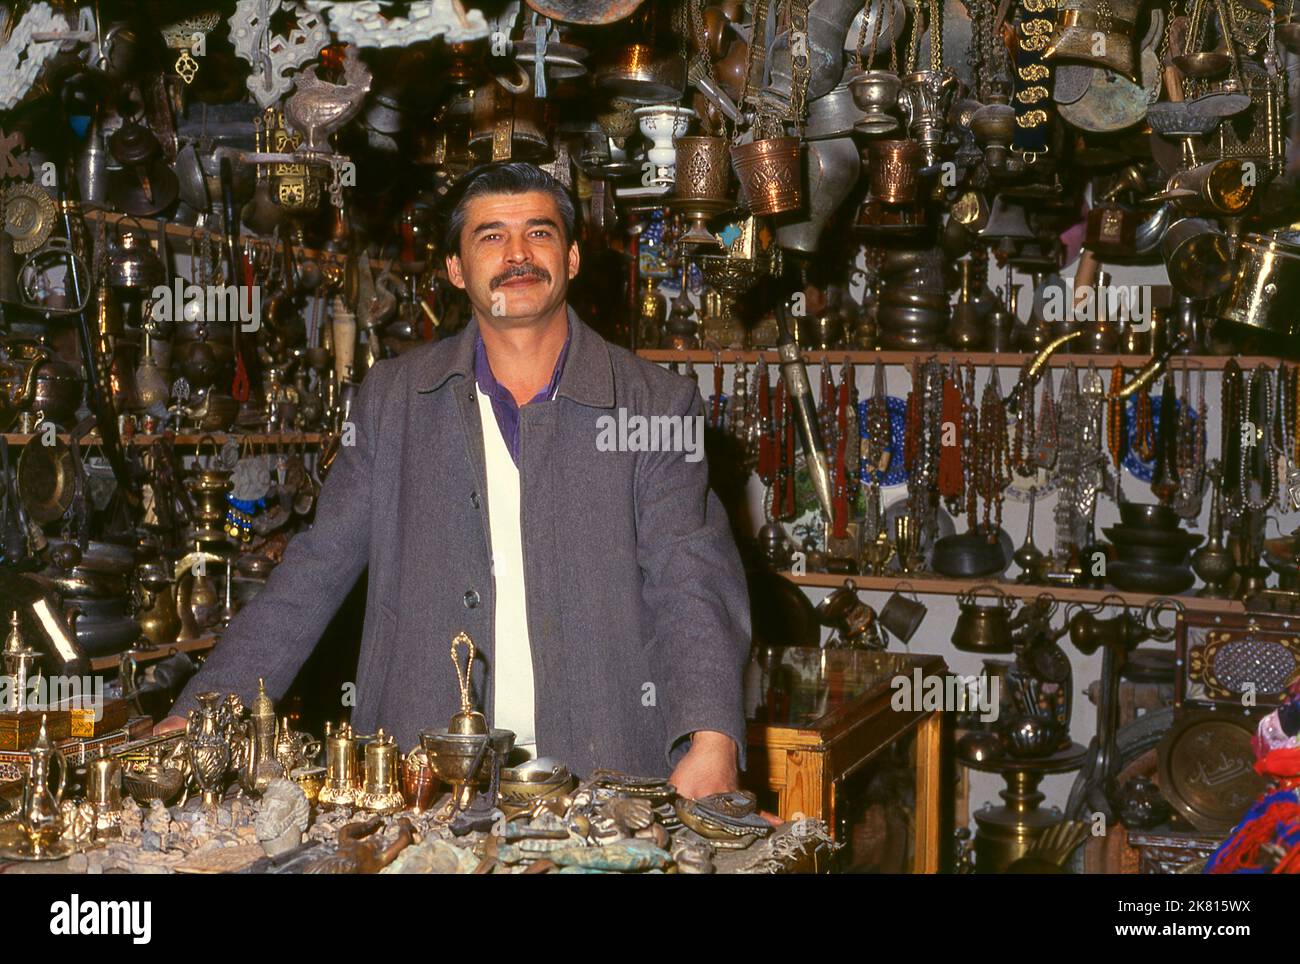 Syria: A brass and metal goods vendor in the ancient Great Bazaar, Aleppo (1997). Aleppo's Great Bazaar (in Arabic, suq or souq) was rebuilt first by the Egyptian Mamelukes who drove out the Mongols, and then, after 1516, by the Turks who incorporated Aleppo into the Ottoman Empire. During the Syrian Civil War, which started in 2011, Aleppo's historic suqs suffered serious damage.  Aleppo, the second city of Syria is possibly the longest continually inhabited settlement in the world. Its Arabic name, Halab, is mentioned in Semitic texts of the third millennium BCE. Stock Photo